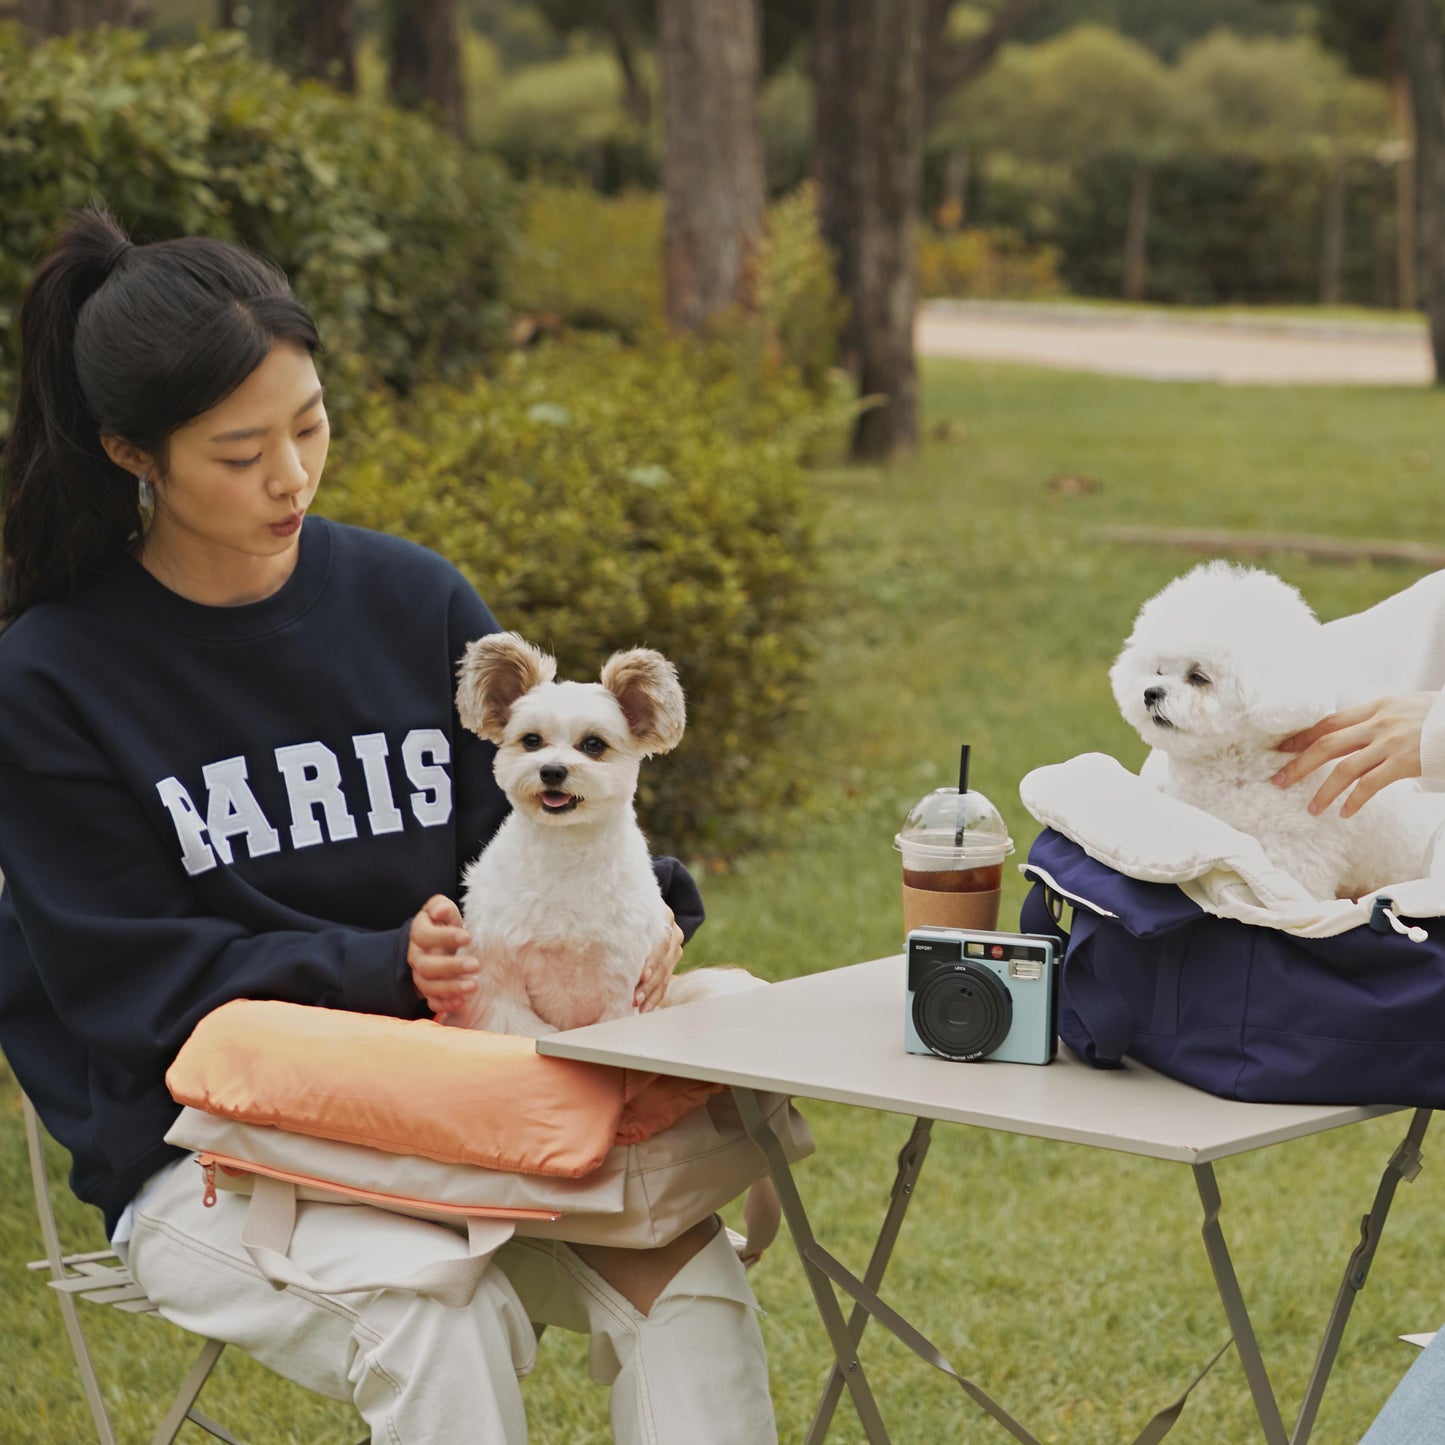 arrr Macaron Po-ong Bag (Pet Carrier) with dual use as an outgoing bag and portable cushion. Keep your pet safe and comfortable during outdoor activities. In Deep Navy colour